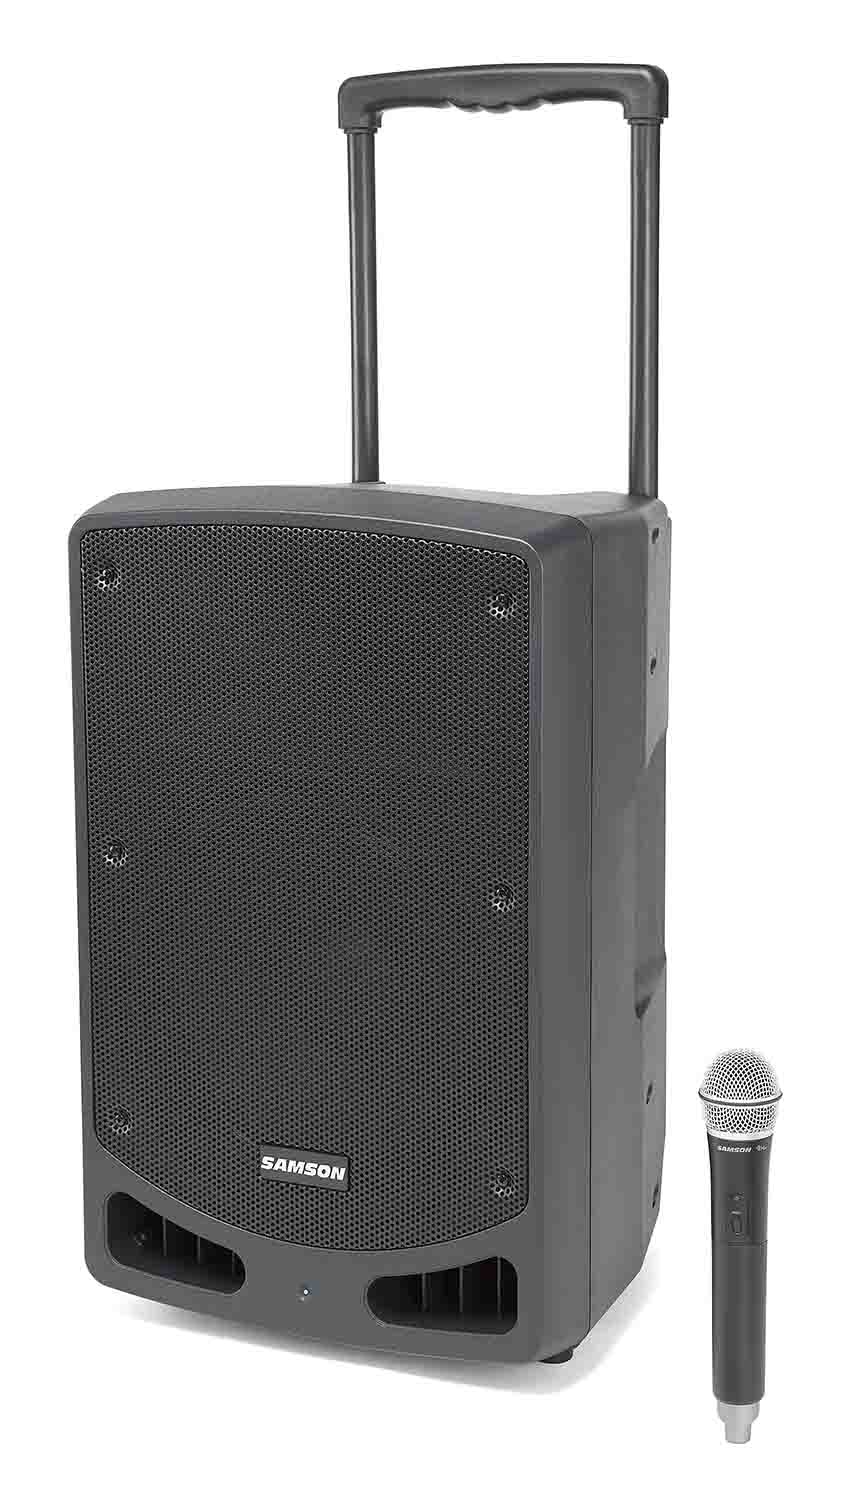 Samson Expedition XP312w D-band Rechargeable Portable PA with Handheld Wireless System and Bluetooth - Hollywood DJ